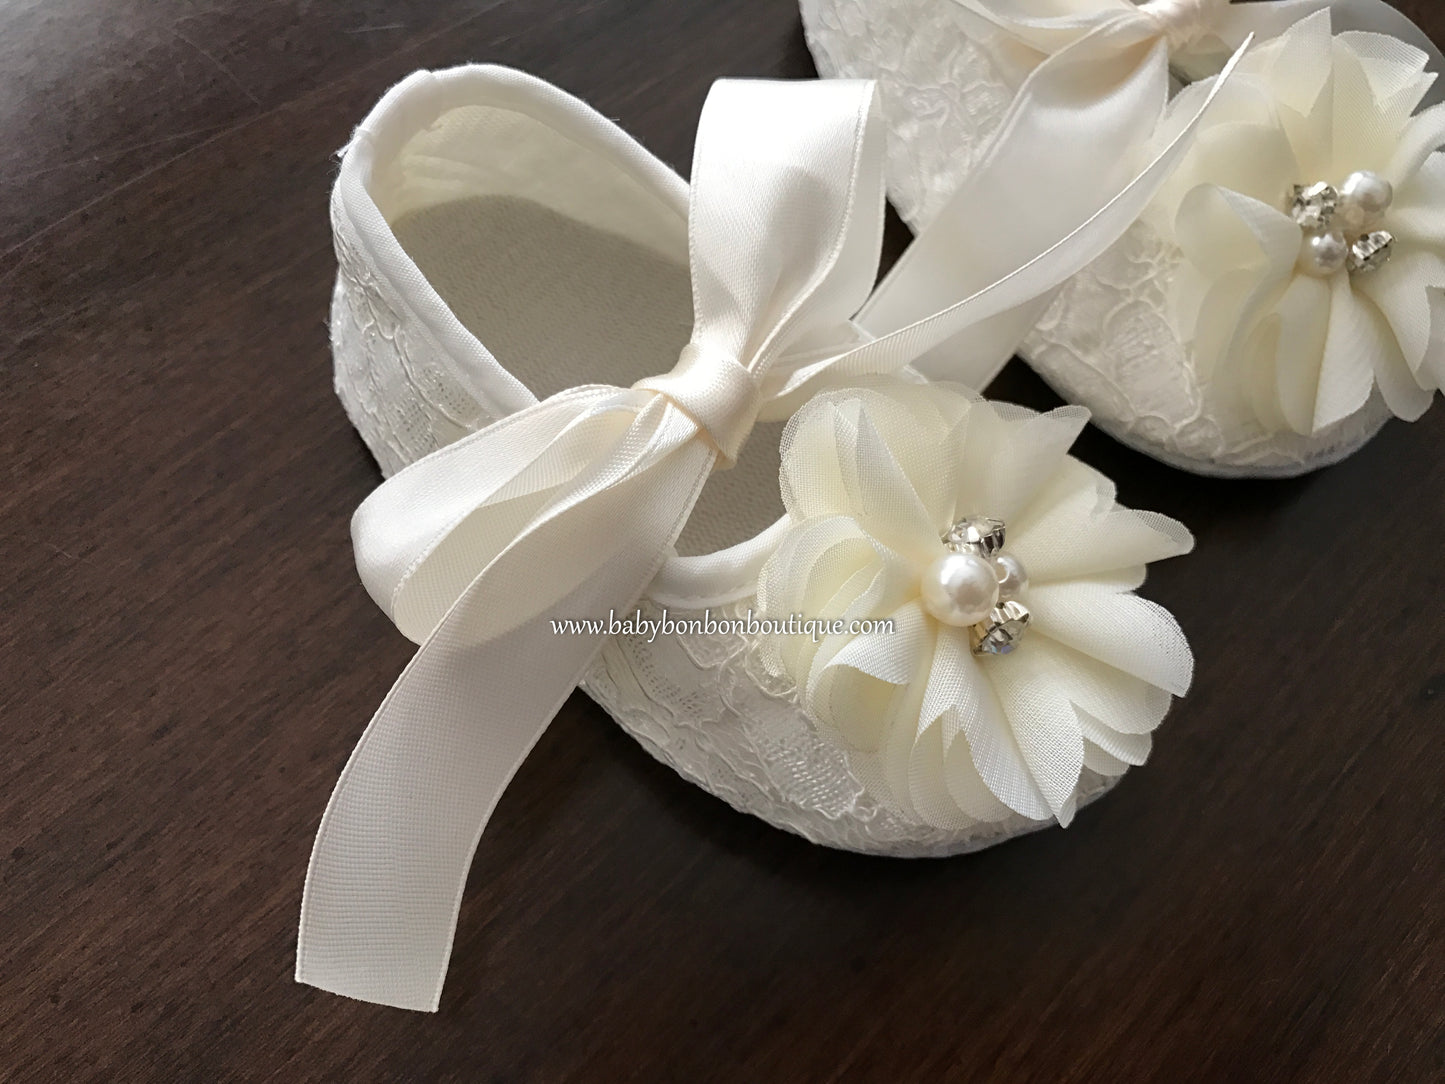 White Christening Shoes with Flowers, Pearls & Rhinestones